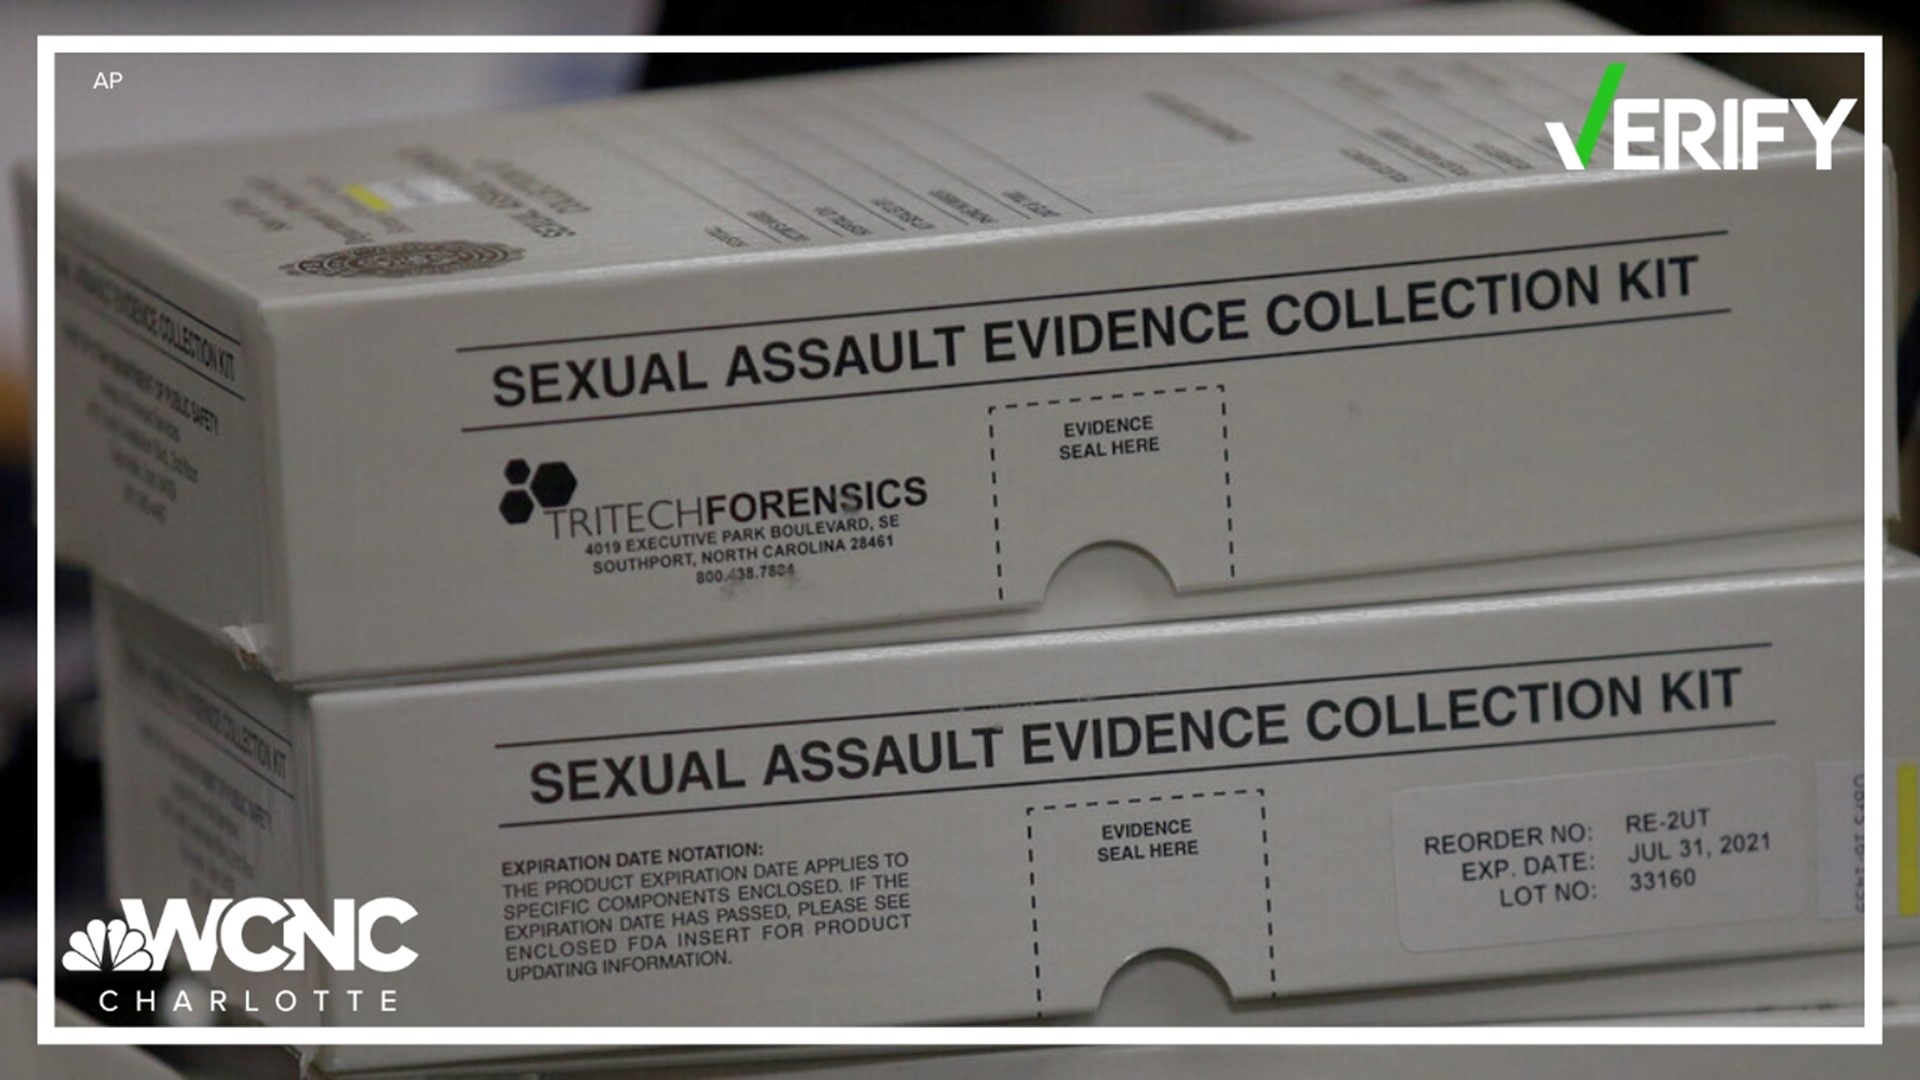 North Carolina is currently working through its backlog of rape kits. According to the Attorney General’s Office, the state is making progress on untested kits.